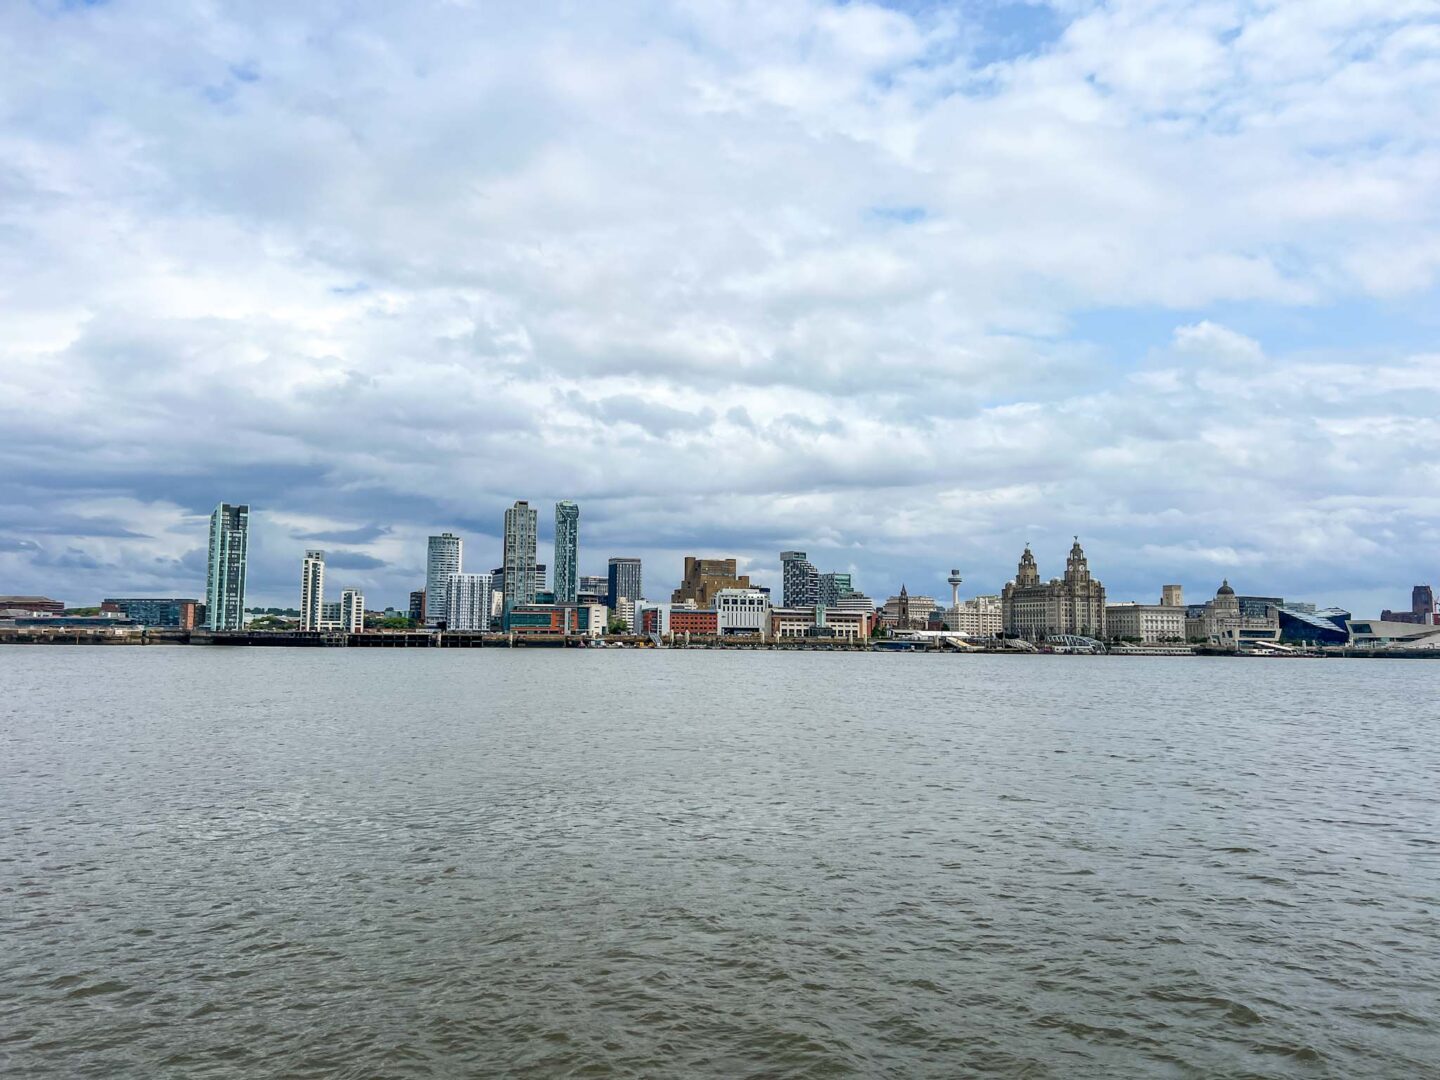 Weekend in Liverpool, View of Liverpool from the Mersey Ferry Cruise